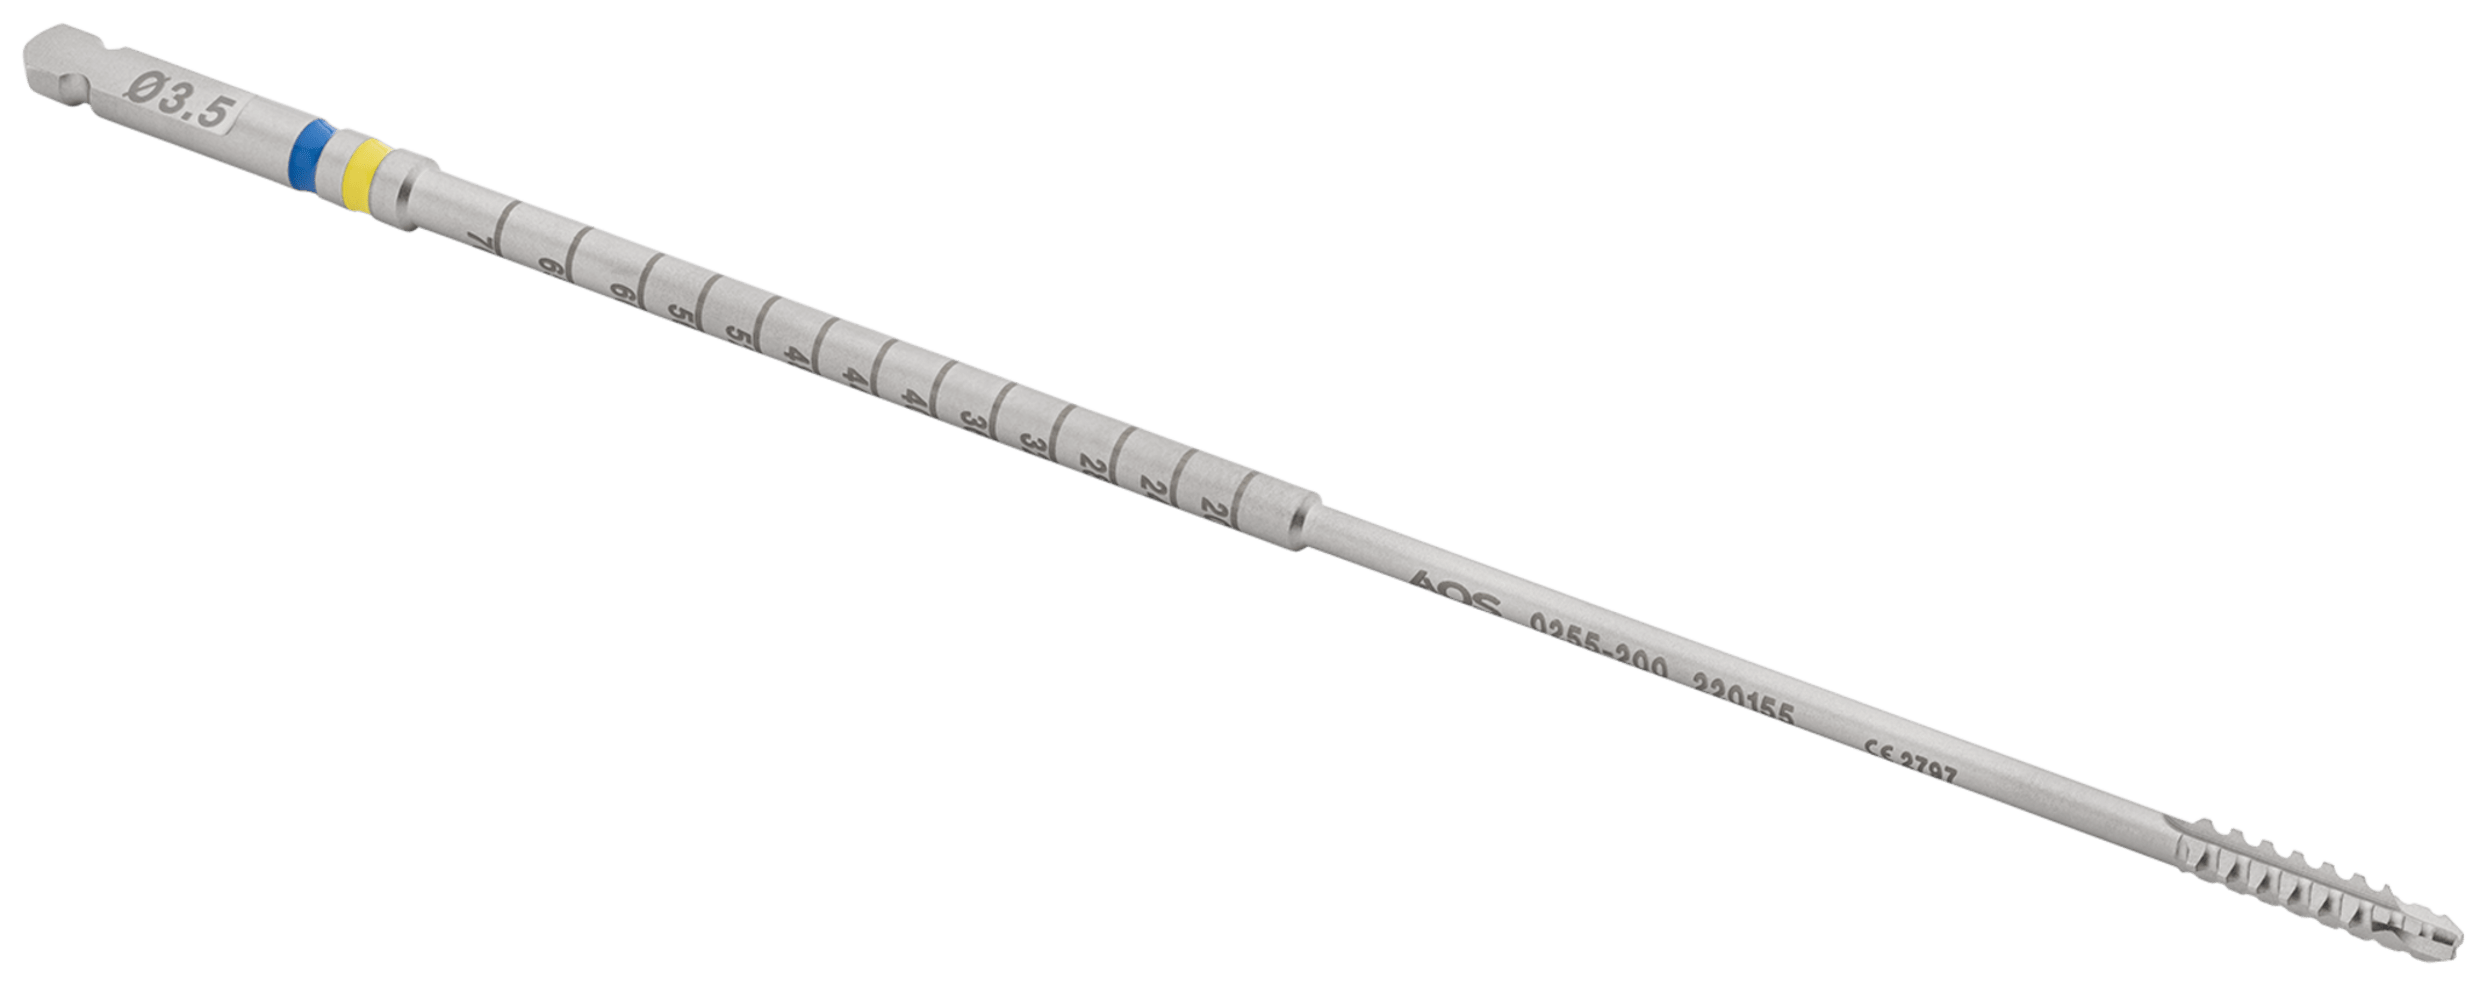 Cancellous Tap, 3.5 mm, AO Style